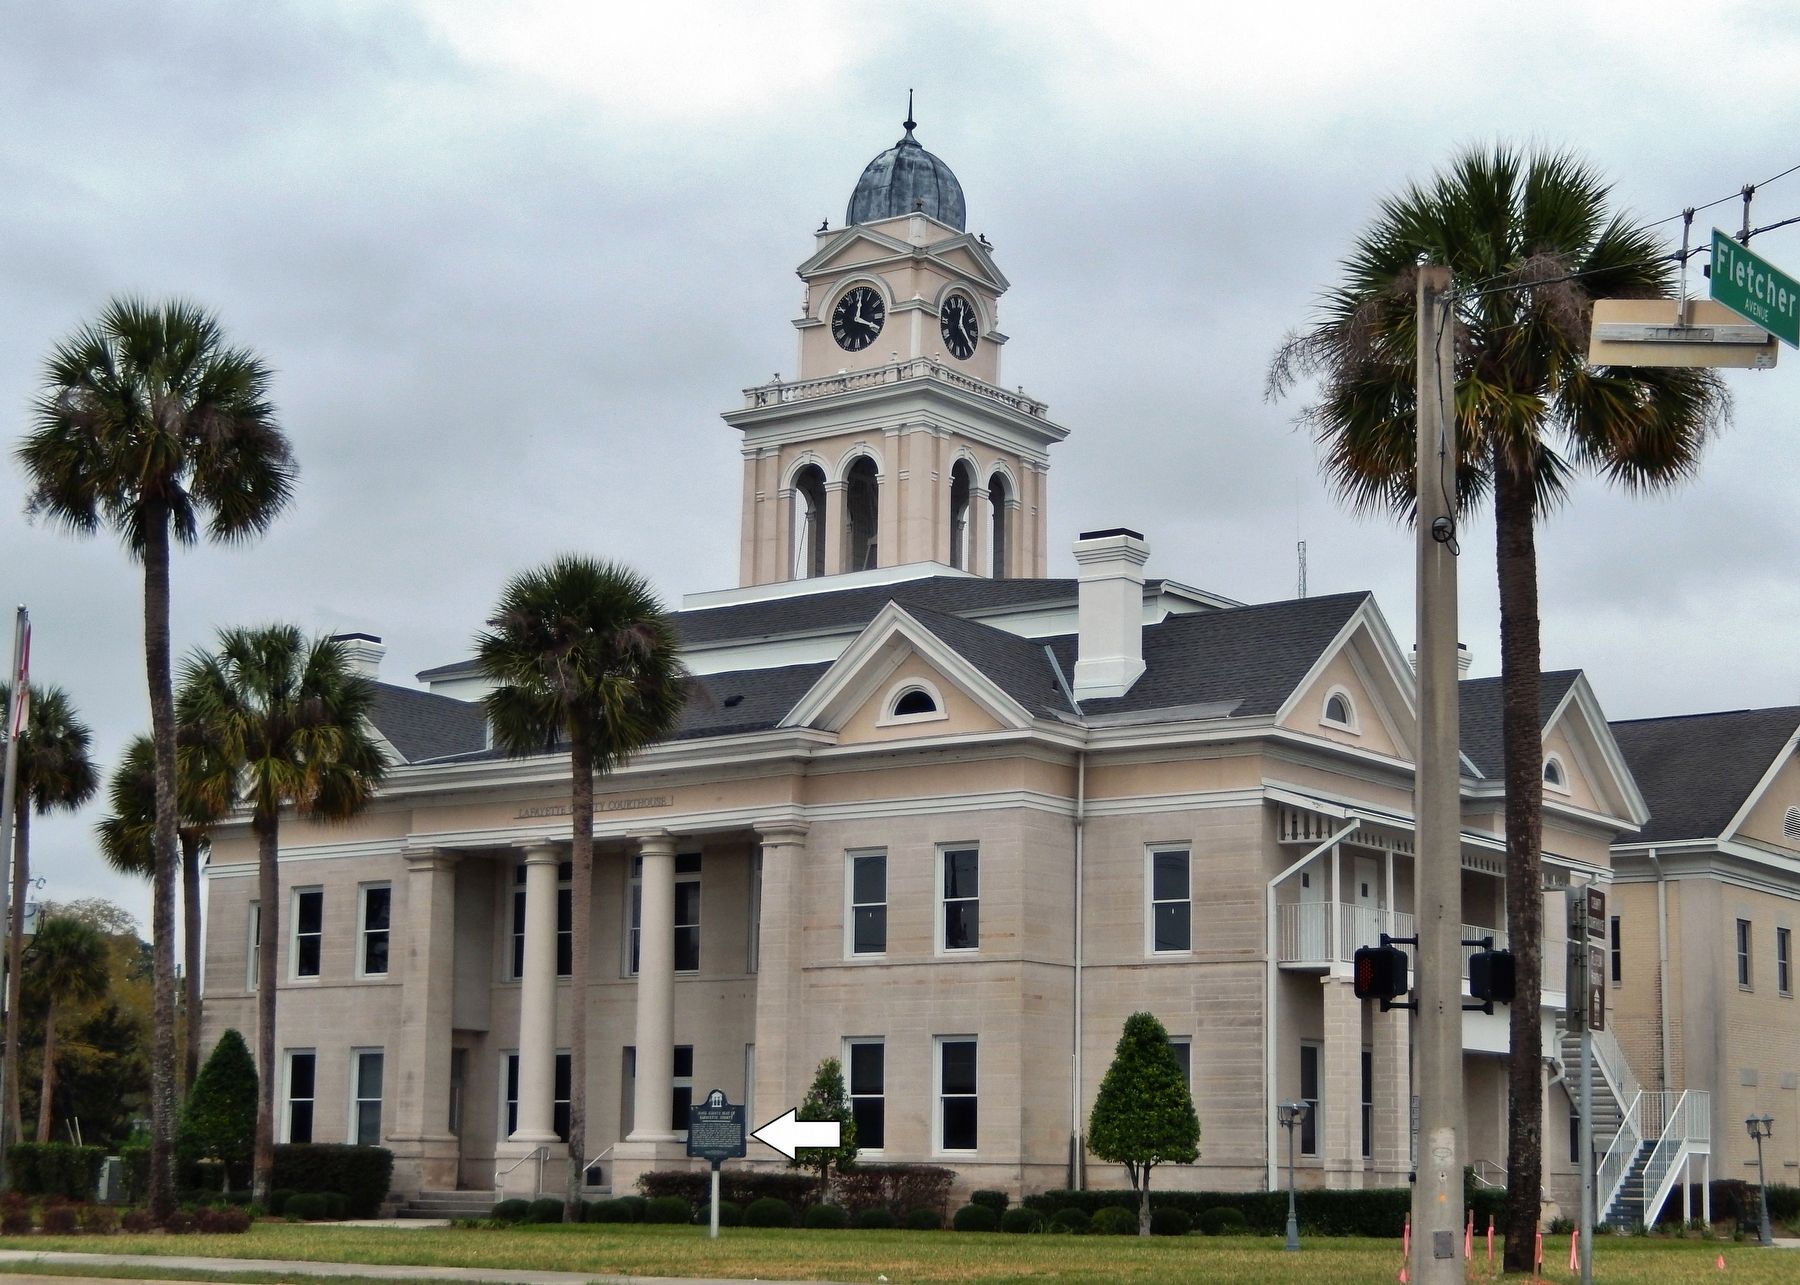 Lafayette County Courthouse (<i>southeast corner view; marker visible near center</i>) image. Click for full size.